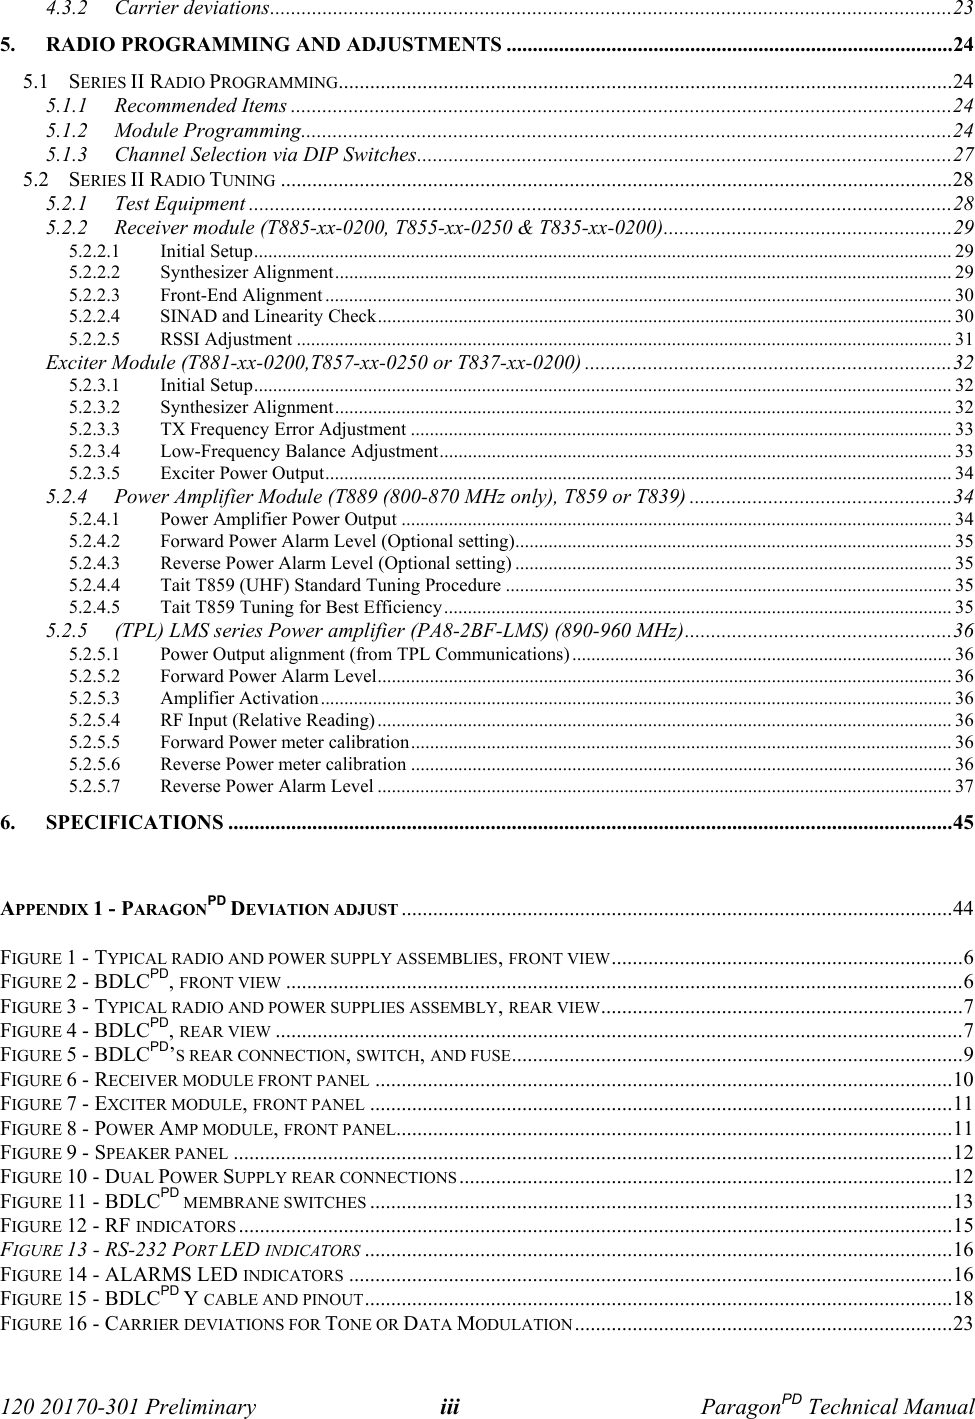  120 20170-301 Preliminary iii ParagonPD Technical Manual4.3.2 Carrier deviations..................................................................................................................................235. RADIO PROGRAMMING AND ADJUSTMENTS .....................................................................................245.1 SERIES II RADIO PROGRAMMING.....................................................................................................................245.1.1 Recommended Items ..............................................................................................................................245.1.2 Module Programming............................................................................................................................245.1.3 Channel Selection via DIP Switches......................................................................................................275.2 SERIES II RADIO TUNING ................................................................................................................................285.2.1 Test Equipment ......................................................................................................................................285.2.2 Receiver module (T885-xx-0200, T855-xx-0250 &amp; T835-xx-0200).......................................................295.2.2.1 Initial Setup................................................................................................................................................... 295.2.2.2 Synthesizer Alignment.................................................................................................................................. 295.2.2.3 Front-End Alignment .................................................................................................................................... 305.2.2.4 SINAD and Linearity Check......................................................................................................................... 305.2.2.5 RSSI Adjustment .......................................................................................................................................... 31Exciter Module (T881-xx-0200,T857-xx-0250 or T837-xx-0200) ......................................................................325.2.3.1 Initial Setup................................................................................................................................................... 325.2.3.2 Synthesizer Alignment.................................................................................................................................. 325.2.3.3 TX Frequency Error Adjustment .................................................................................................................. 335.2.3.4 Low-Frequency Balance Adjustment............................................................................................................ 335.2.3.5 Exciter Power Output.................................................................................................................................... 345.2.4 Power Amplifier Module (T889 (800-870 MHz only), T859 or T839) ..................................................345.2.4.1 Power Amplifier Power Output .................................................................................................................... 345.2.4.2 Forward Power Alarm Level (Optional setting)............................................................................................ 355.2.4.3 Reverse Power Alarm Level (Optional setting) ............................................................................................ 355.2.4.4 Tait T859 (UHF) Standard Tuning Procedure .............................................................................................. 355.2.4.5 Tait T859 Tuning for Best Efficiency........................................................................................................... 355.2.5 (TPL) LMS series Power amplifier (PA8-2BF-LMS) (890-960 MHz)...................................................365.2.5.1 Power Output alignment (from TPL Communications) ................................................................................ 365.2.5.2 Forward Power Alarm Level......................................................................................................................... 365.2.5.3 Amplifier Activation..................................................................................................................................... 365.2.5.4 RF Input (Relative Reading) ......................................................................................................................... 365.2.5.5 Forward Power meter calibration.................................................................................................................. 365.2.5.6 Reverse Power meter calibration .................................................................................................................. 365.2.5.7 Reverse Power Alarm Level ......................................................................................................................... 376. SPECIFICATIONS ..........................................................................................................................................45APPENDIX 1 - PARAGONPD DEVIATION ADJUST .........................................................................................................44FIGURE 1 - TYPICAL RADIO AND POWER SUPPLY ASSEMBLIES, FRONT VIEW...................................................................6FIGURE 2 - BDLCPD, FRONT VIEW .................................................................................................................................6FIGURE 3 - TYPICAL RADIO AND POWER SUPPLIES ASSEMBLY, REAR VIEW.....................................................................7FIGURE 4 - BDLCPD, REAR VIEW ...................................................................................................................................7FIGURE 5 - BDLCPD’S REAR CONNECTION, SWITCH, AND FUSE......................................................................................9FIGURE 6 - RECEIVER MODULE FRONT PANEL ..............................................................................................................10FIGURE 7 - EXCITER MODULE, FRONT PANEL ...............................................................................................................11FIGURE 8 - POWER AMP MODULE, FRONT PANEL..........................................................................................................11FIGURE 9 - SPEAKER PANEL .........................................................................................................................................12FIGURE 10 - DUAL POWER SUPPLY REAR CONNECTIONS ..............................................................................................12FIGURE 11 - BDLCPD MEMBRANE SWITCHES ...............................................................................................................13FIGURE 12 - RF INDICATORS ........................................................................................................................................15FIGURE 13 - RS-232 PORT LED INDICATORS ................................................................................................................16FIGURE 14 - ALARMS LED INDICATORS ...................................................................................................................16FIGURE 15 - BDLCPD Y CABLE AND PINOUT................................................................................................................18FIGURE 16 - CARRIER DEVIATIONS FOR TONE OR DATA MODULATION........................................................................23